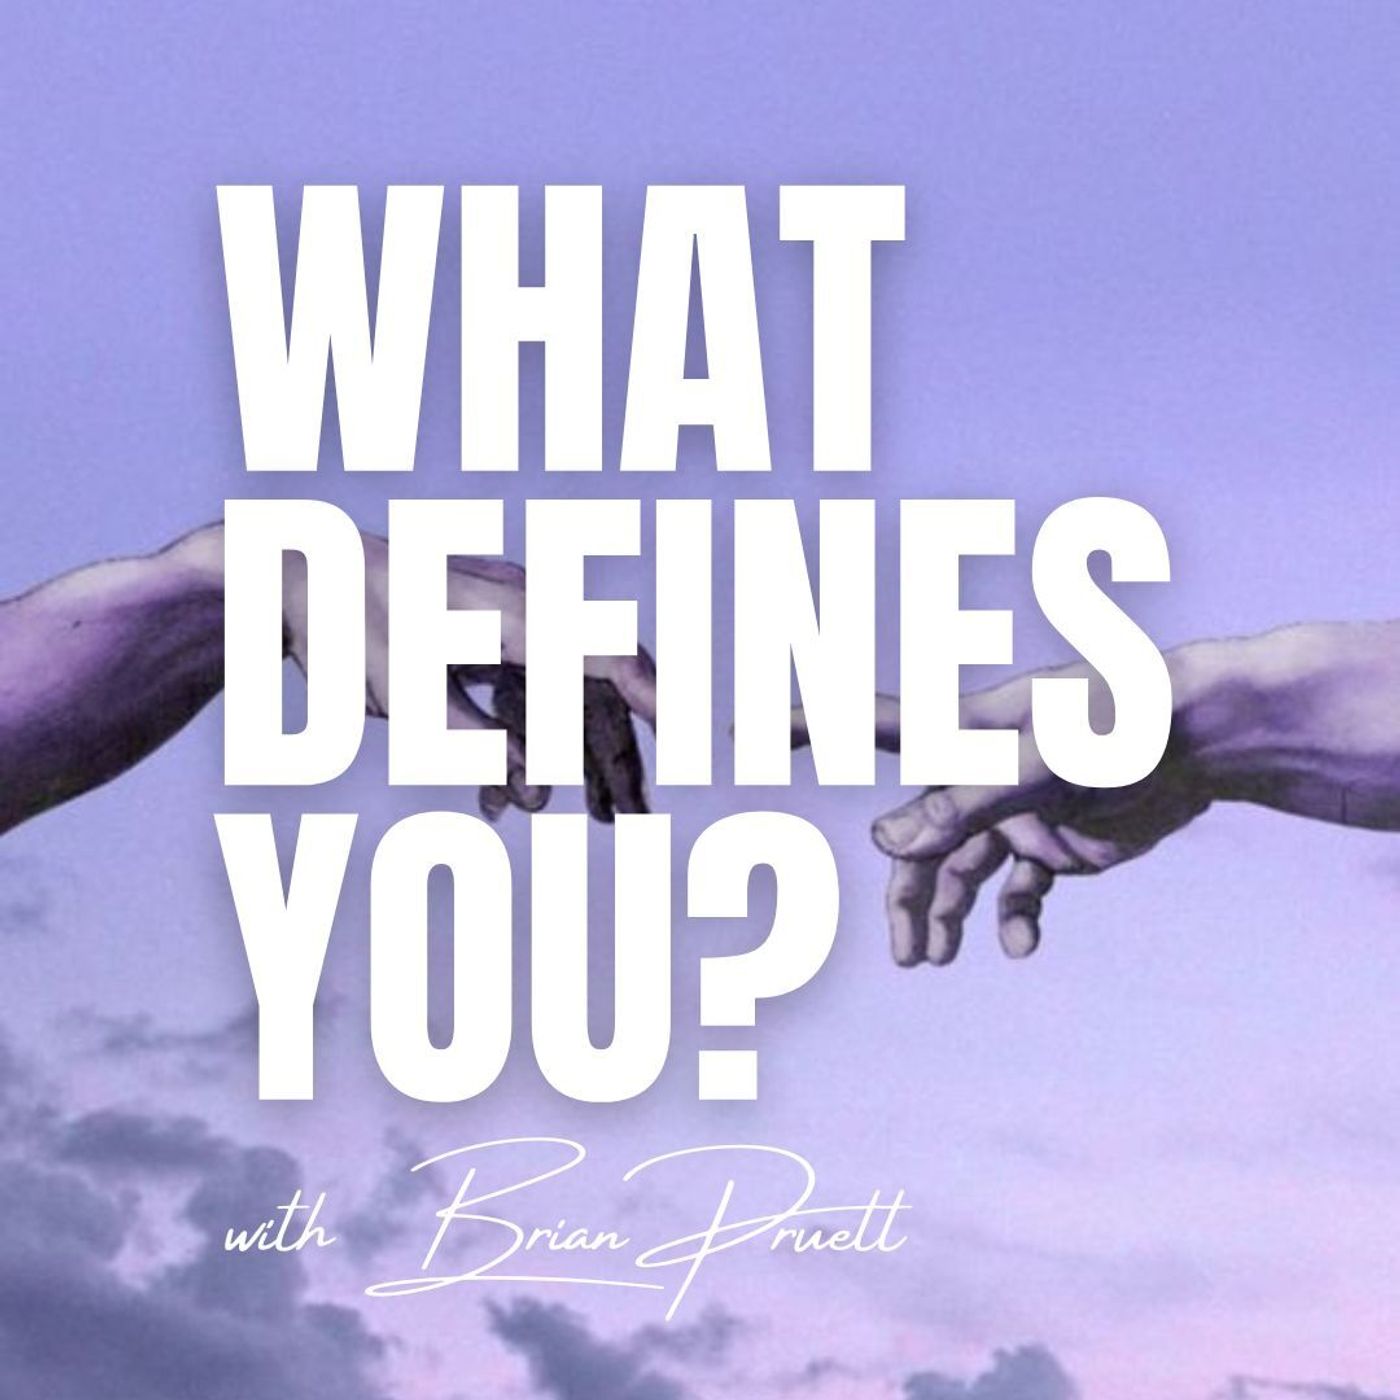 40: What Ultimately Defines You